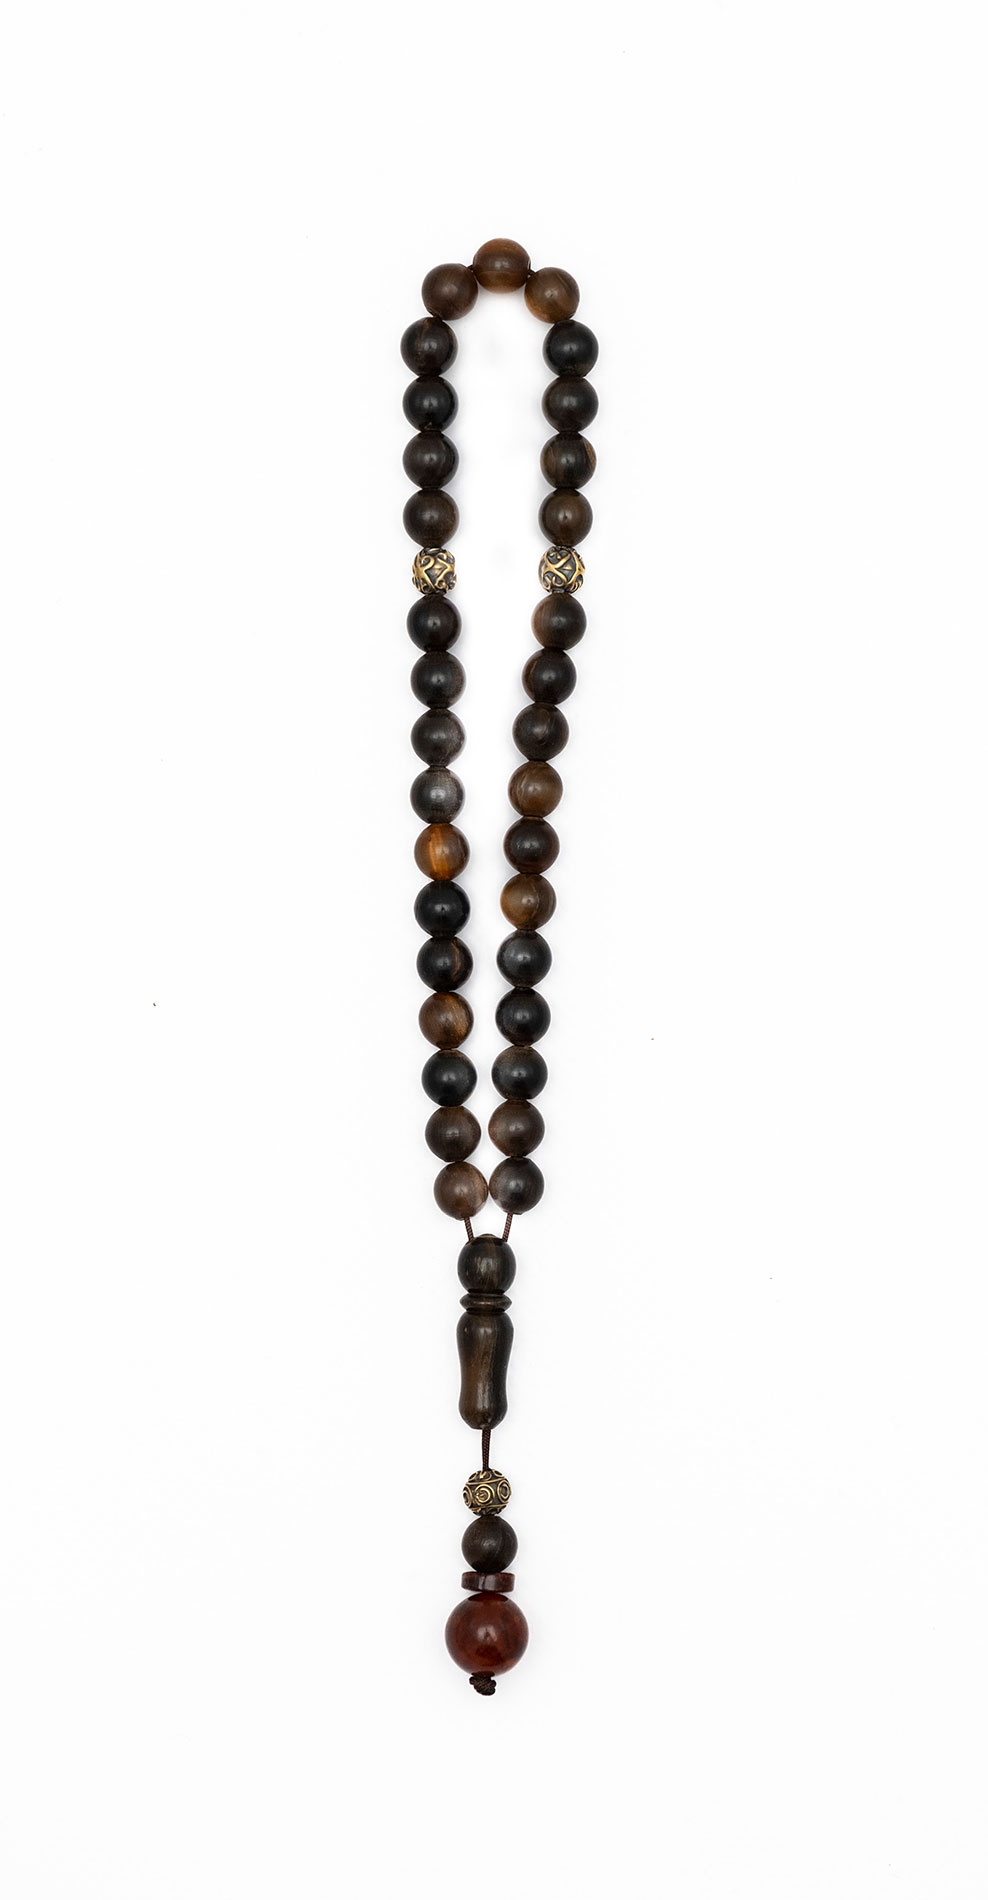 Muslim Prayer beads made of Water-buffalo Horn (coloured) and Amber from Baltic Sea (Ambroid)